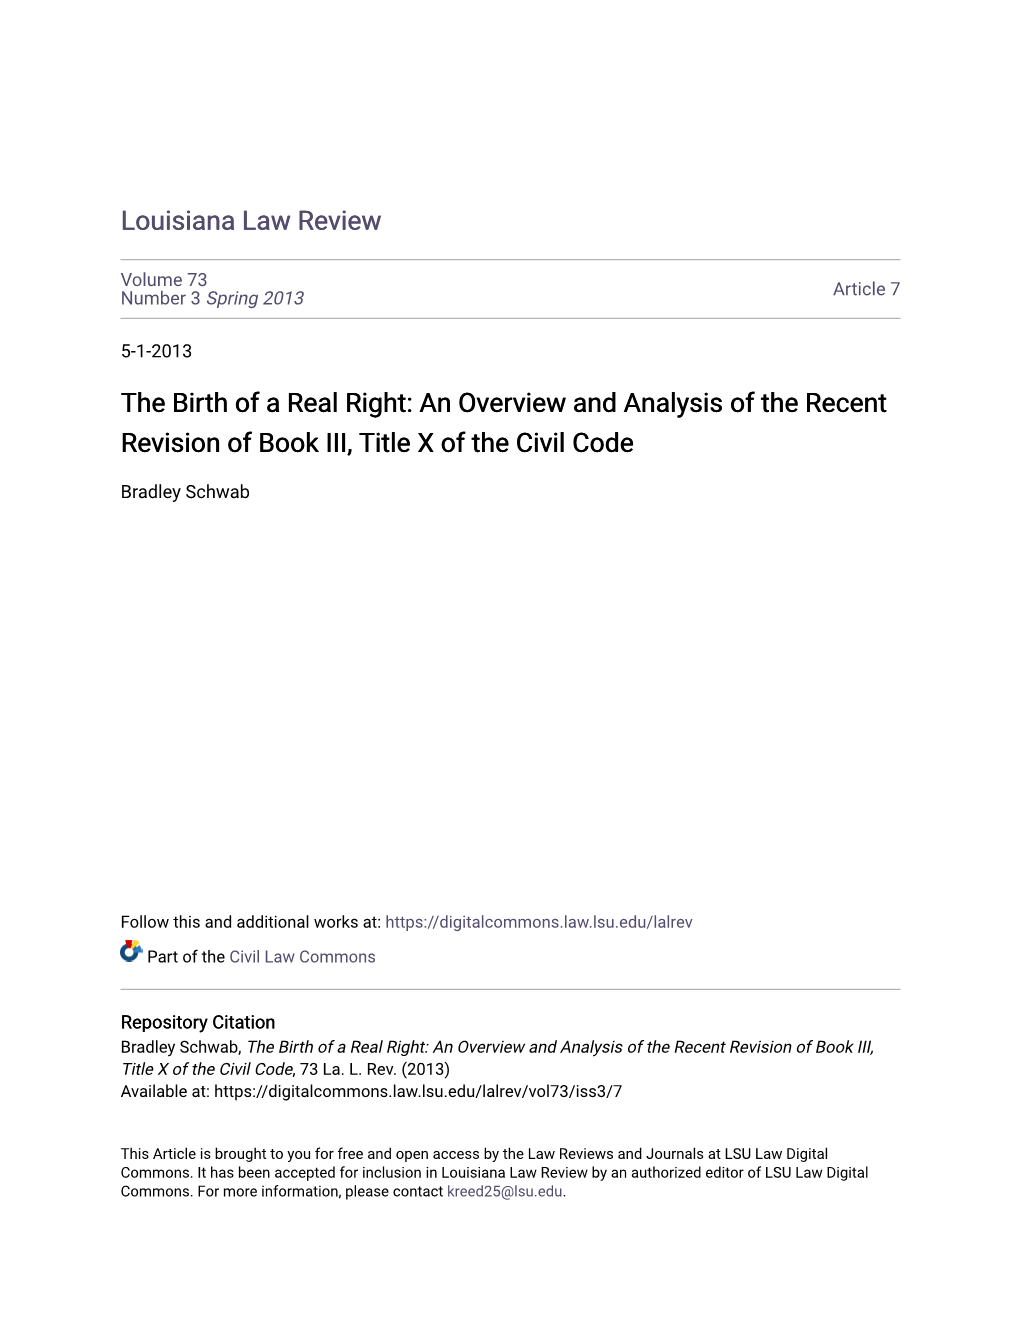 The Birth of a Real Right: an Overview and Analysis of the Recent Revision of Book III, Title X of the Civil Code